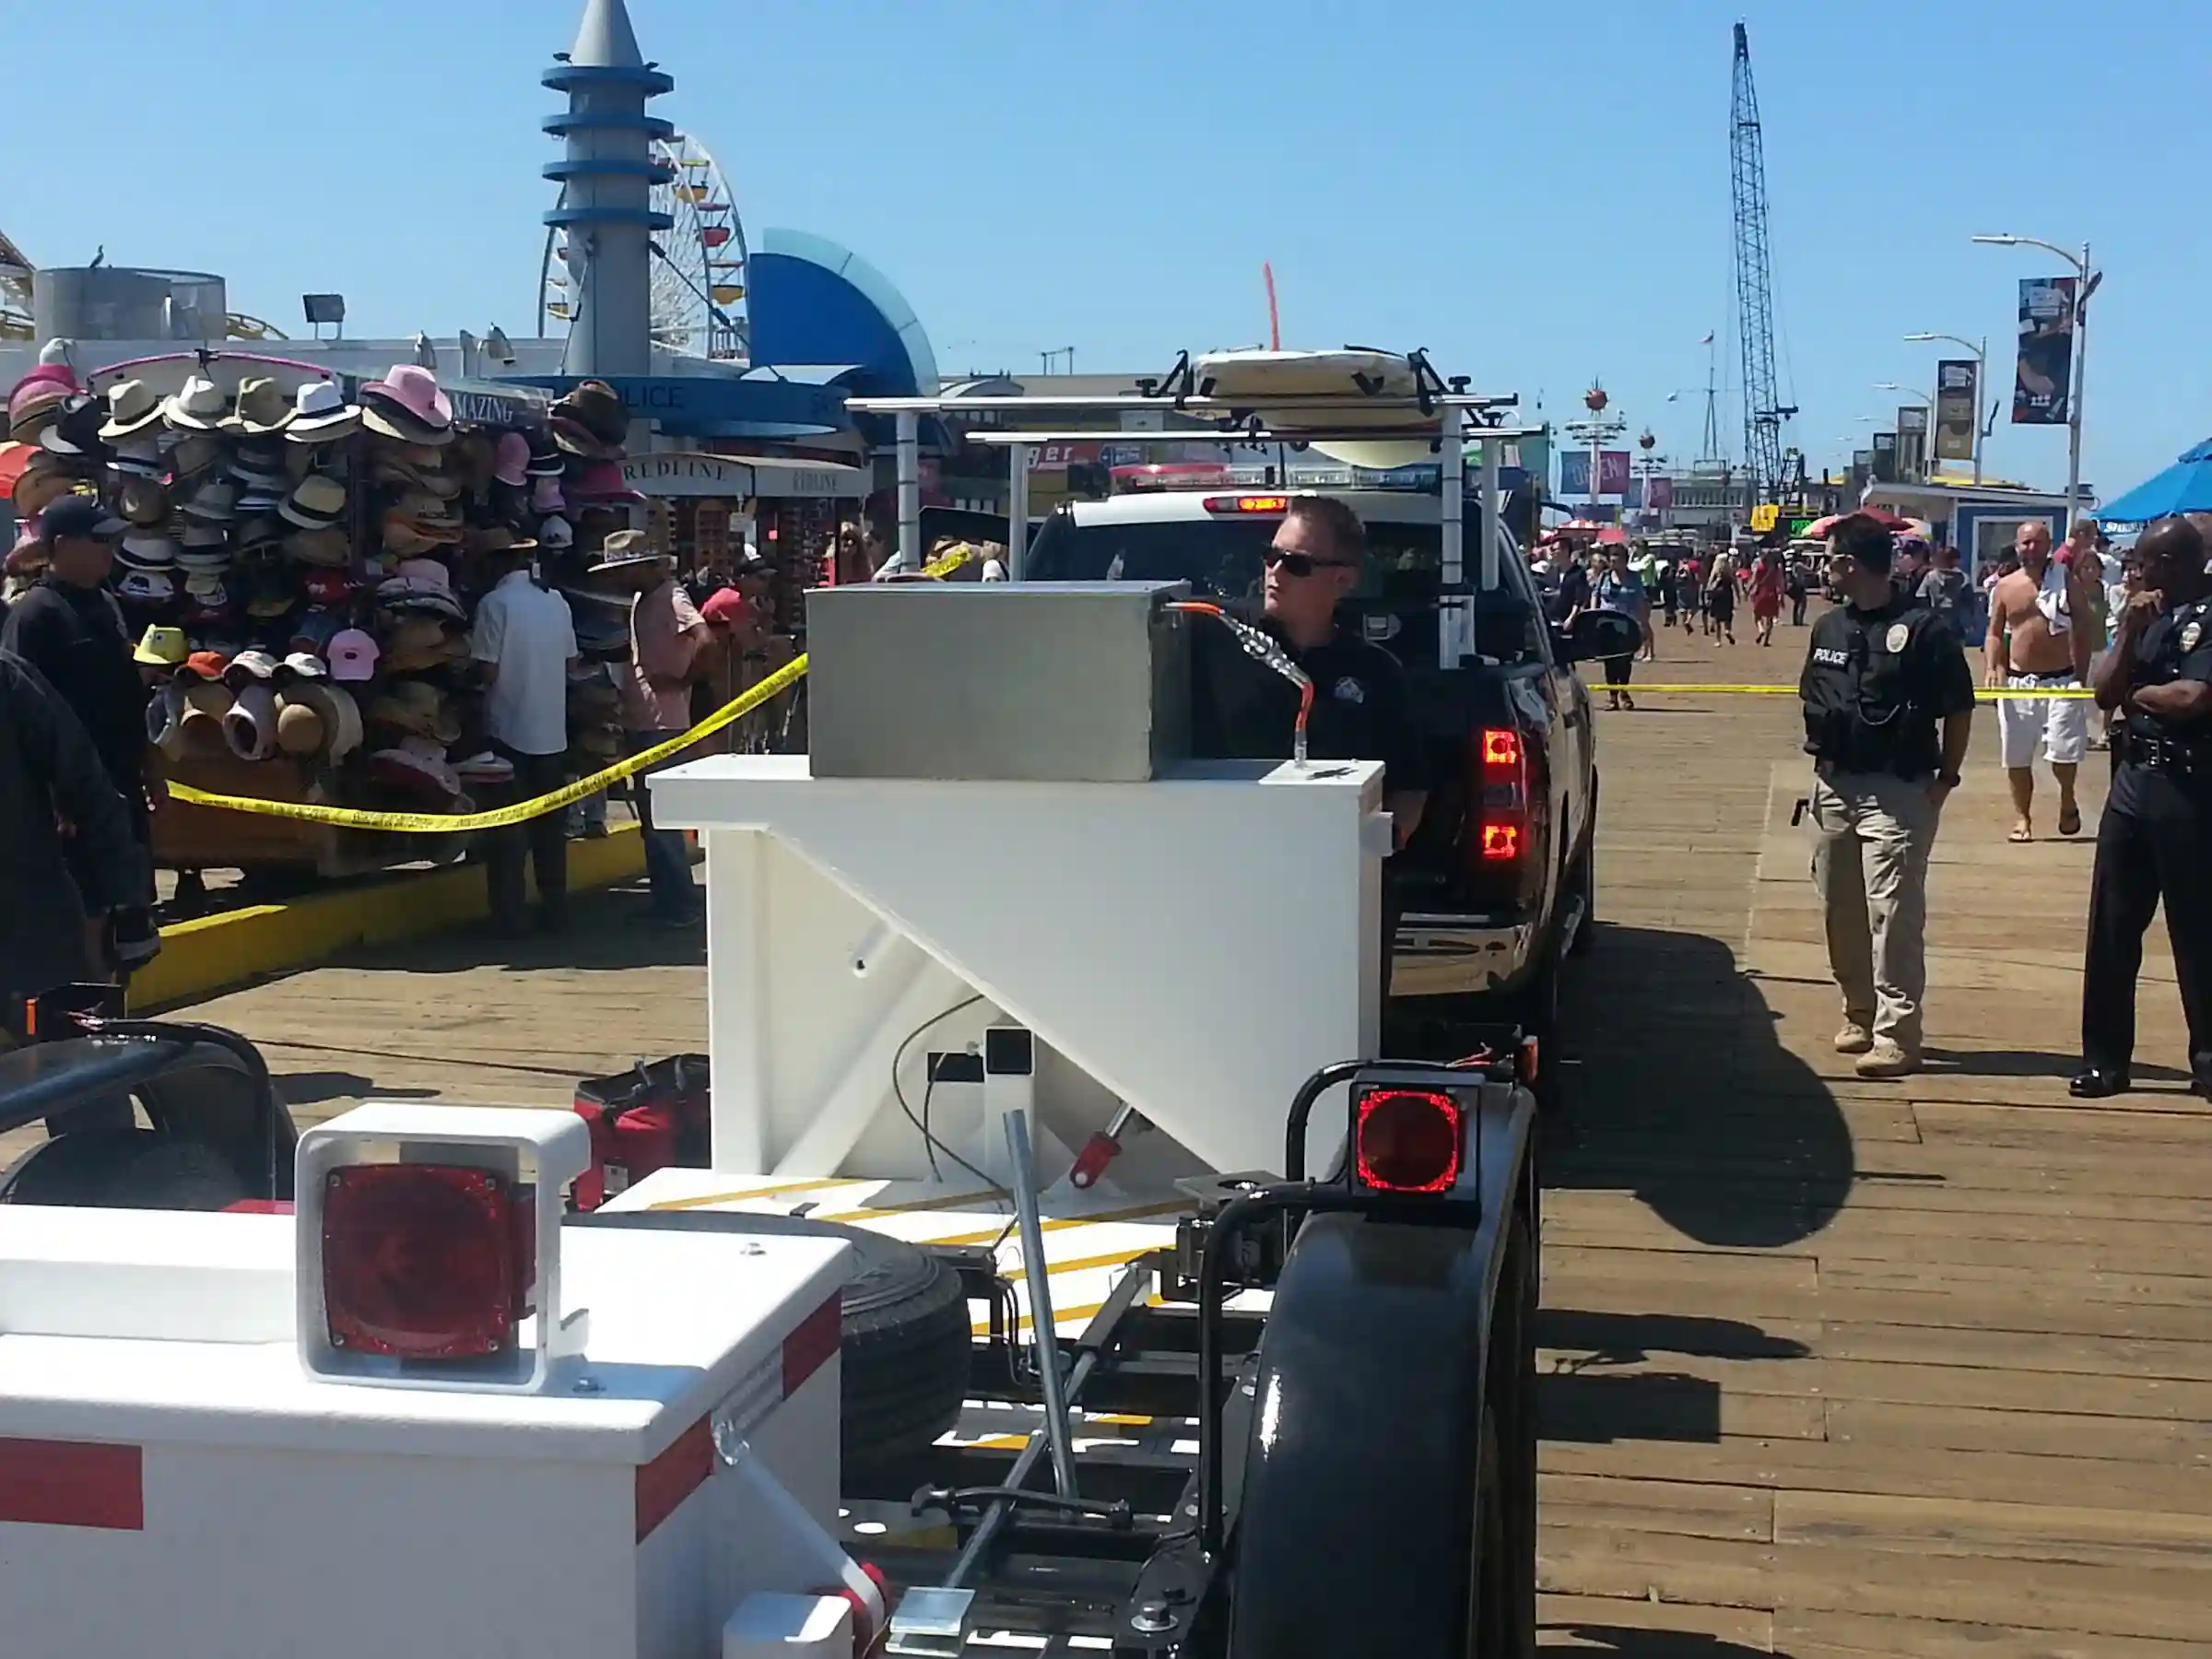 A Delta Scientific mobile barrier deployed on a lively boardwalk, with police oversight ensuring the safety of the bustling public space filled with visitors and vendors near ocean-side attractions.